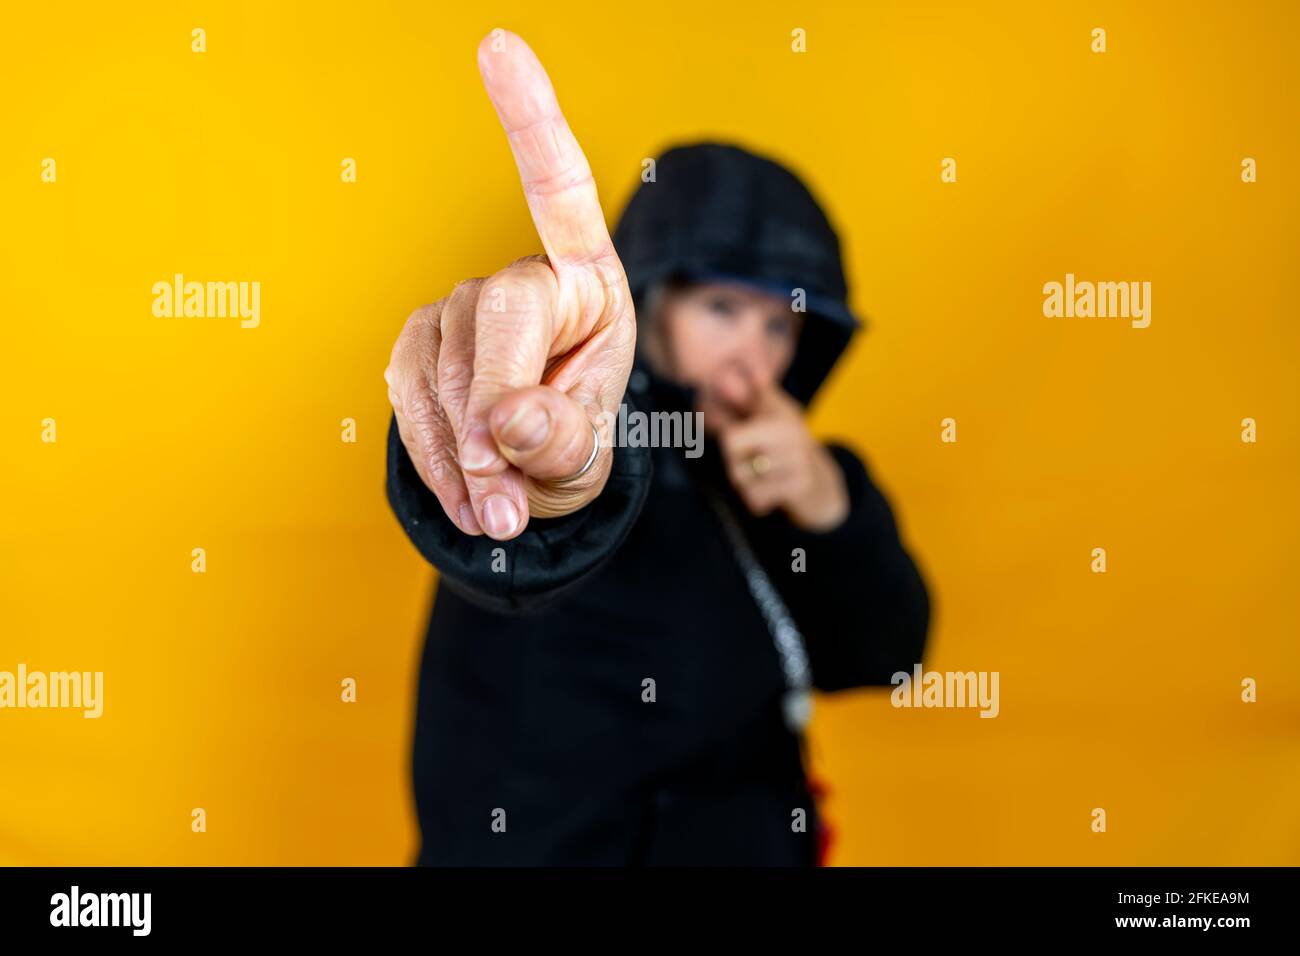 Funny portrait of mature woman. Lady having fun dressed as an angry rapper. Mature woman on colored backgrounds Stock Photo